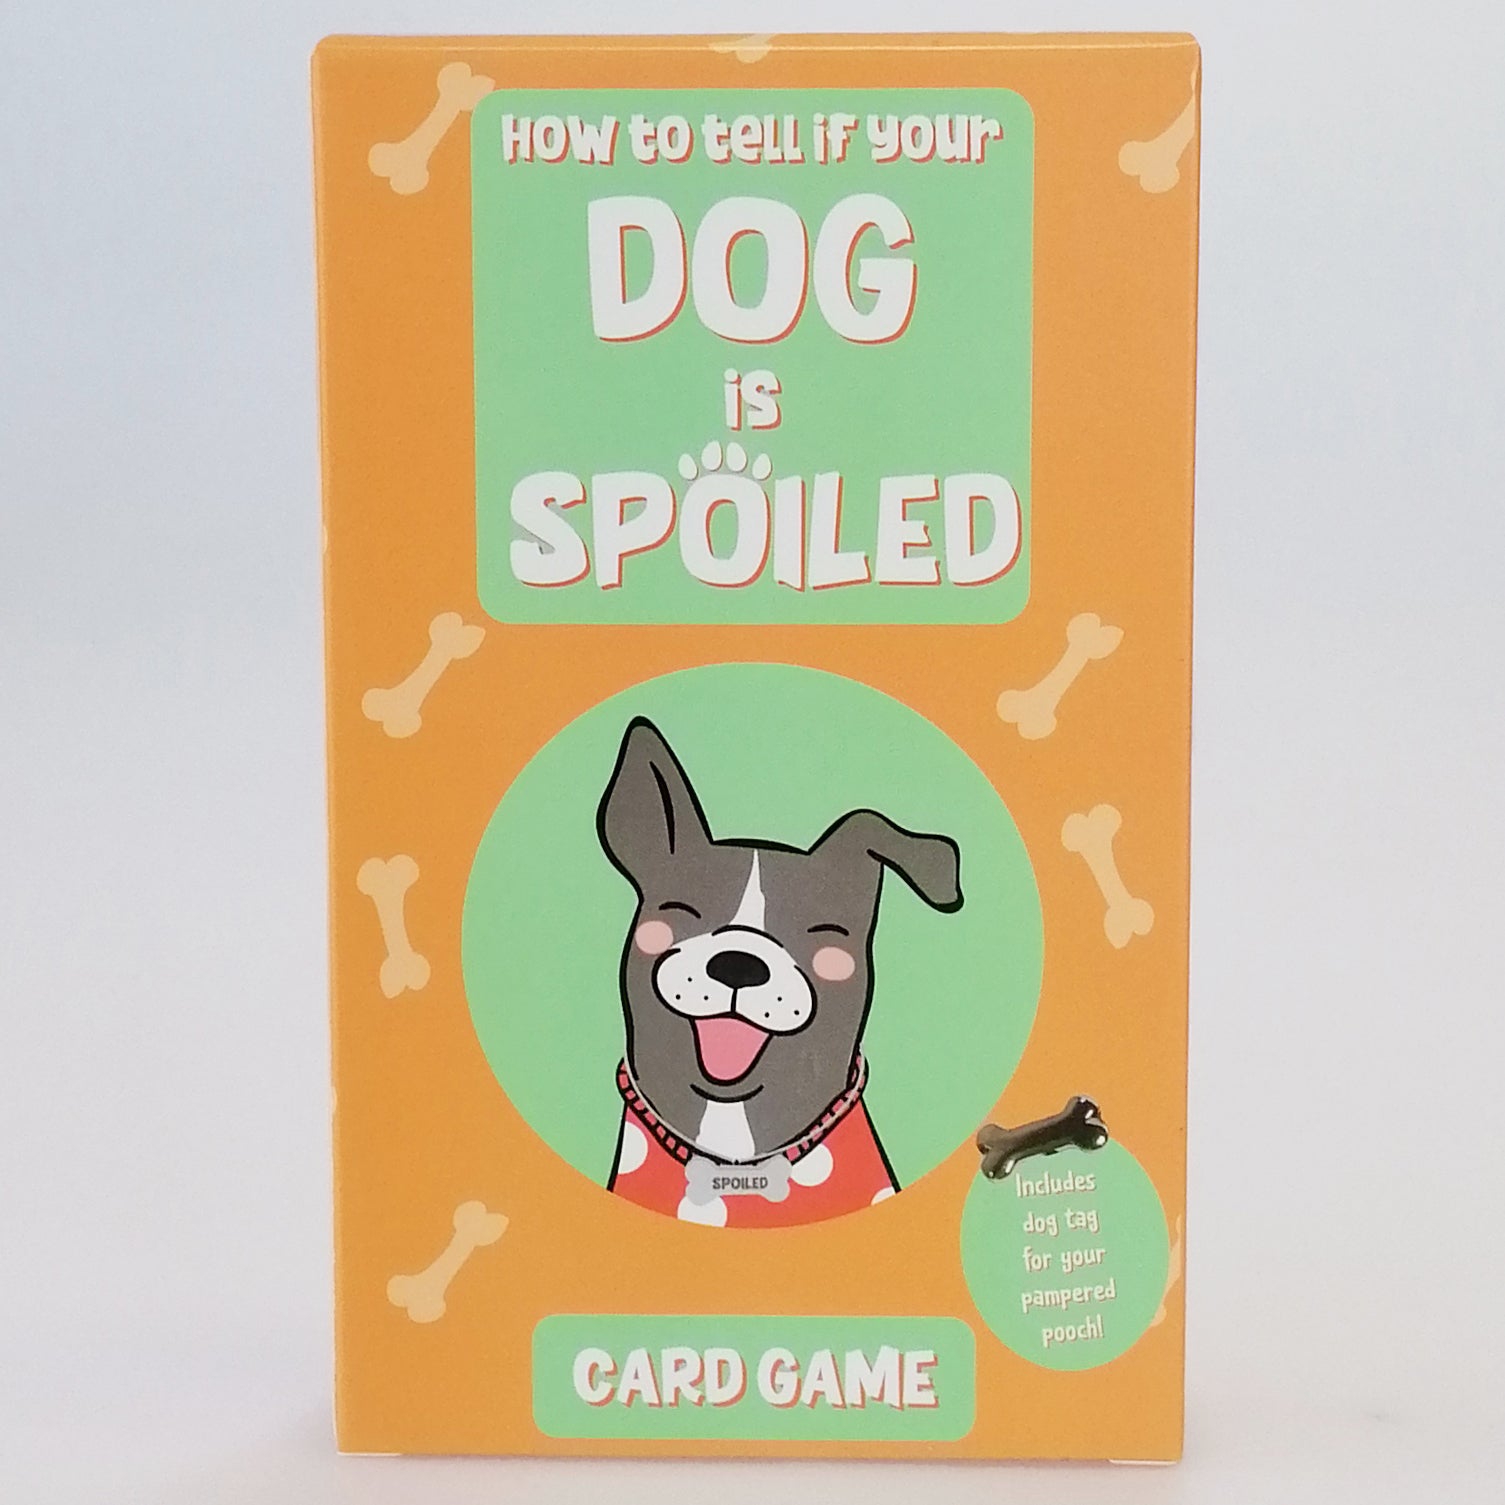 How to Tell if Your Dog is Spoiled' Card Game